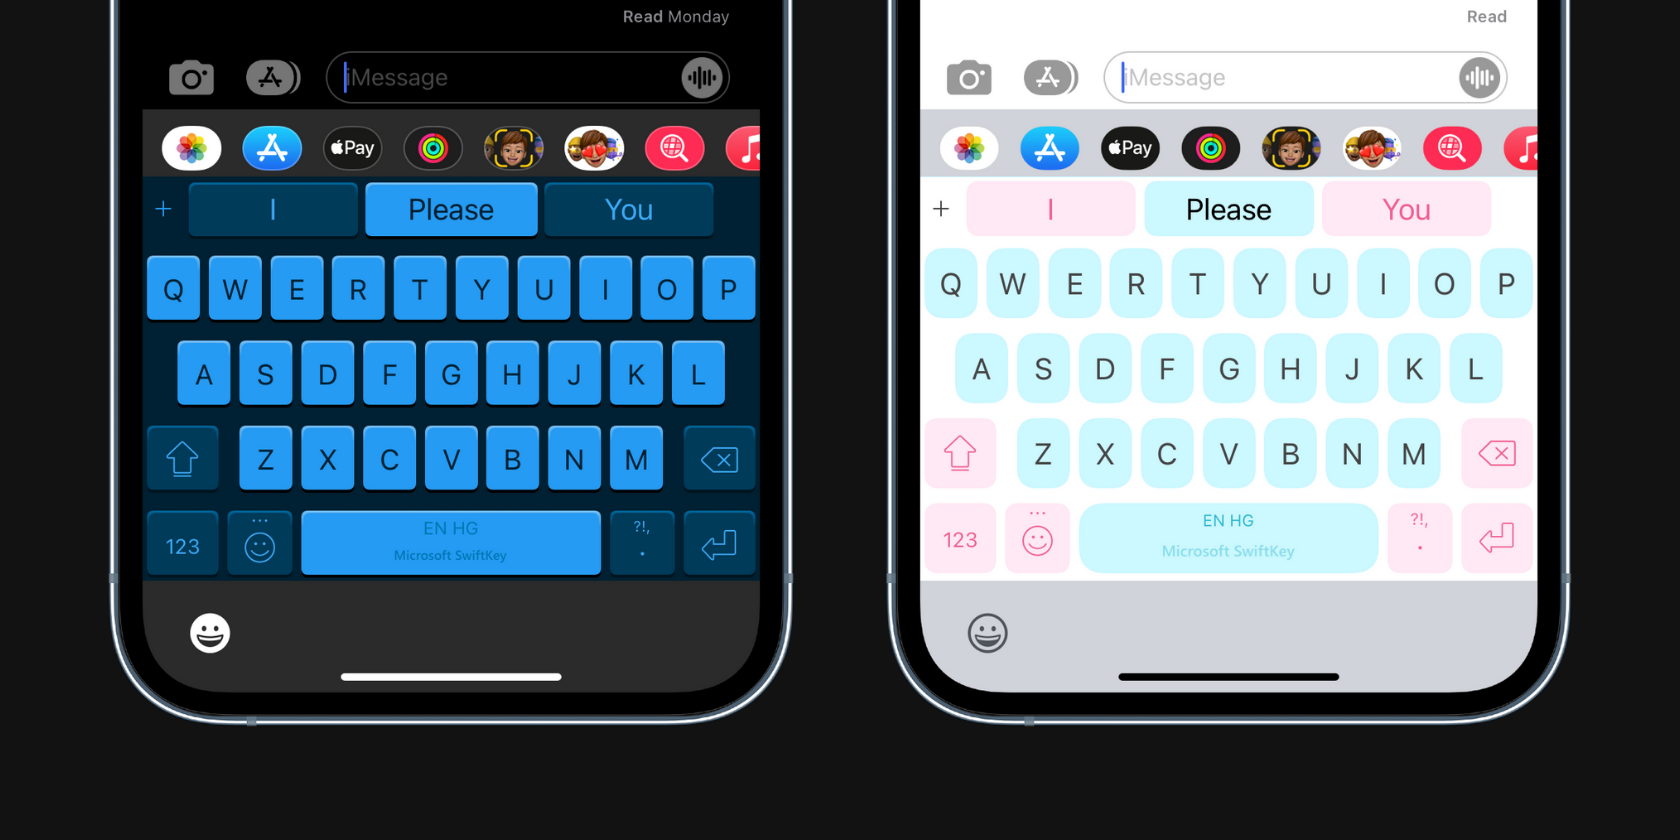 Third-party keyboards on iPhone